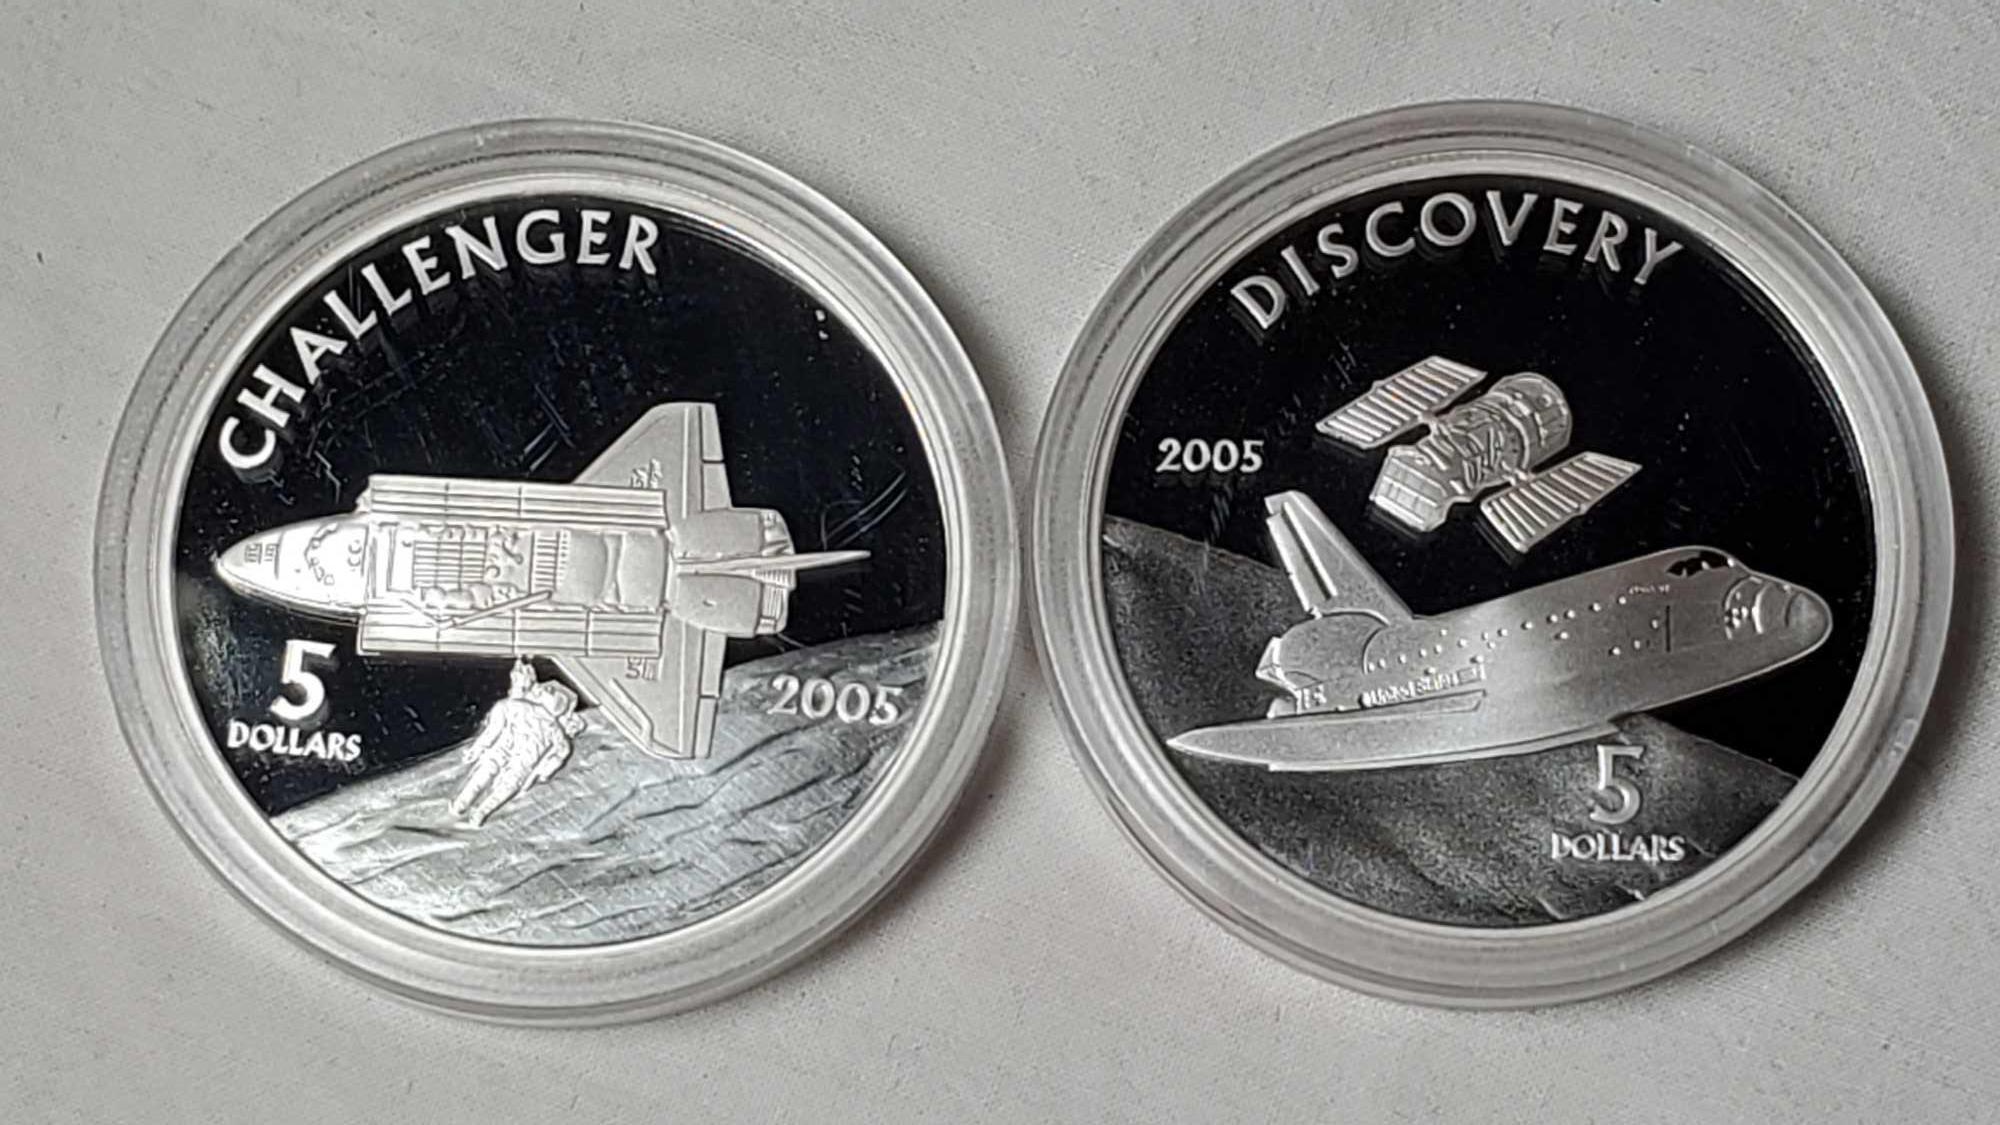 4 1 Oz .999 Fine Silver Bullion Space Shuttle Coins in Case with NASA Badge Medal